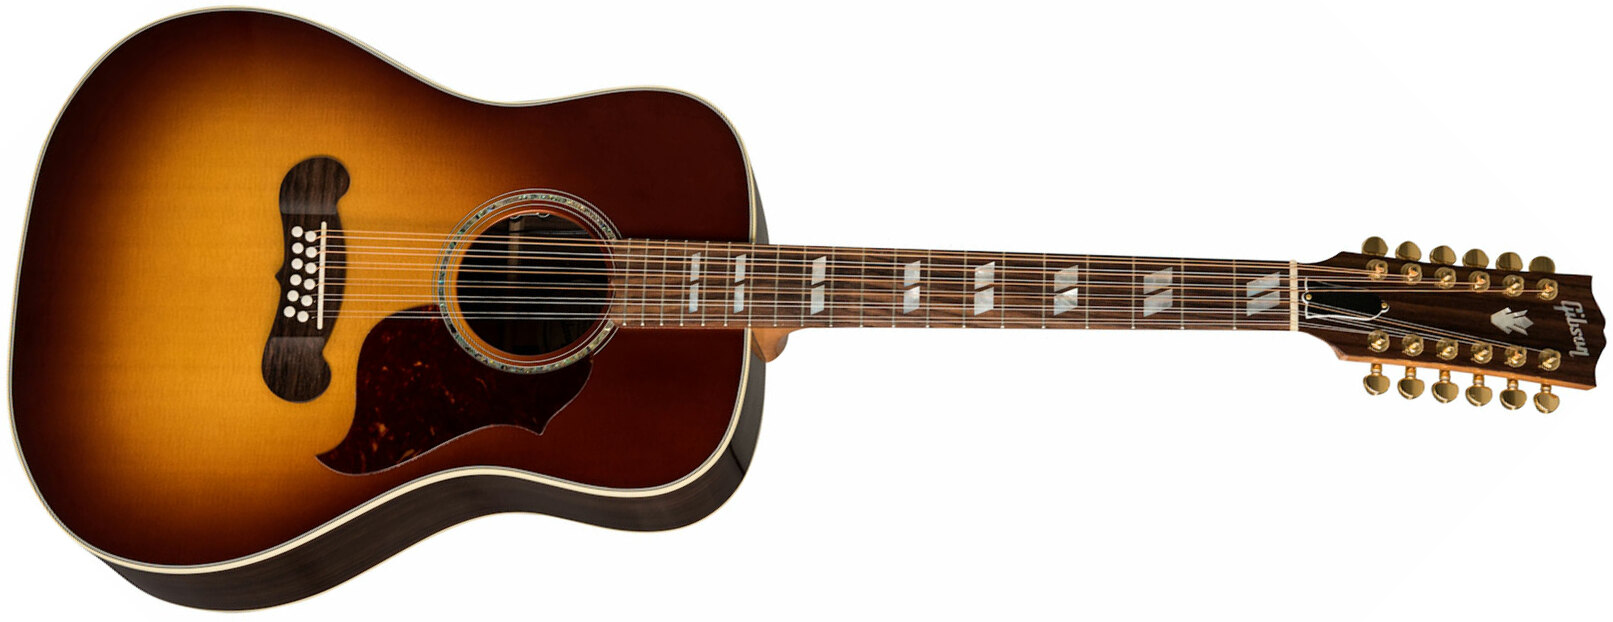 Gibson Songwriter 12-string 2019 Dreadnought 12c Epicea Palissandre Rw - Rosewood Burst - Electro acoustic guitar - Main picture